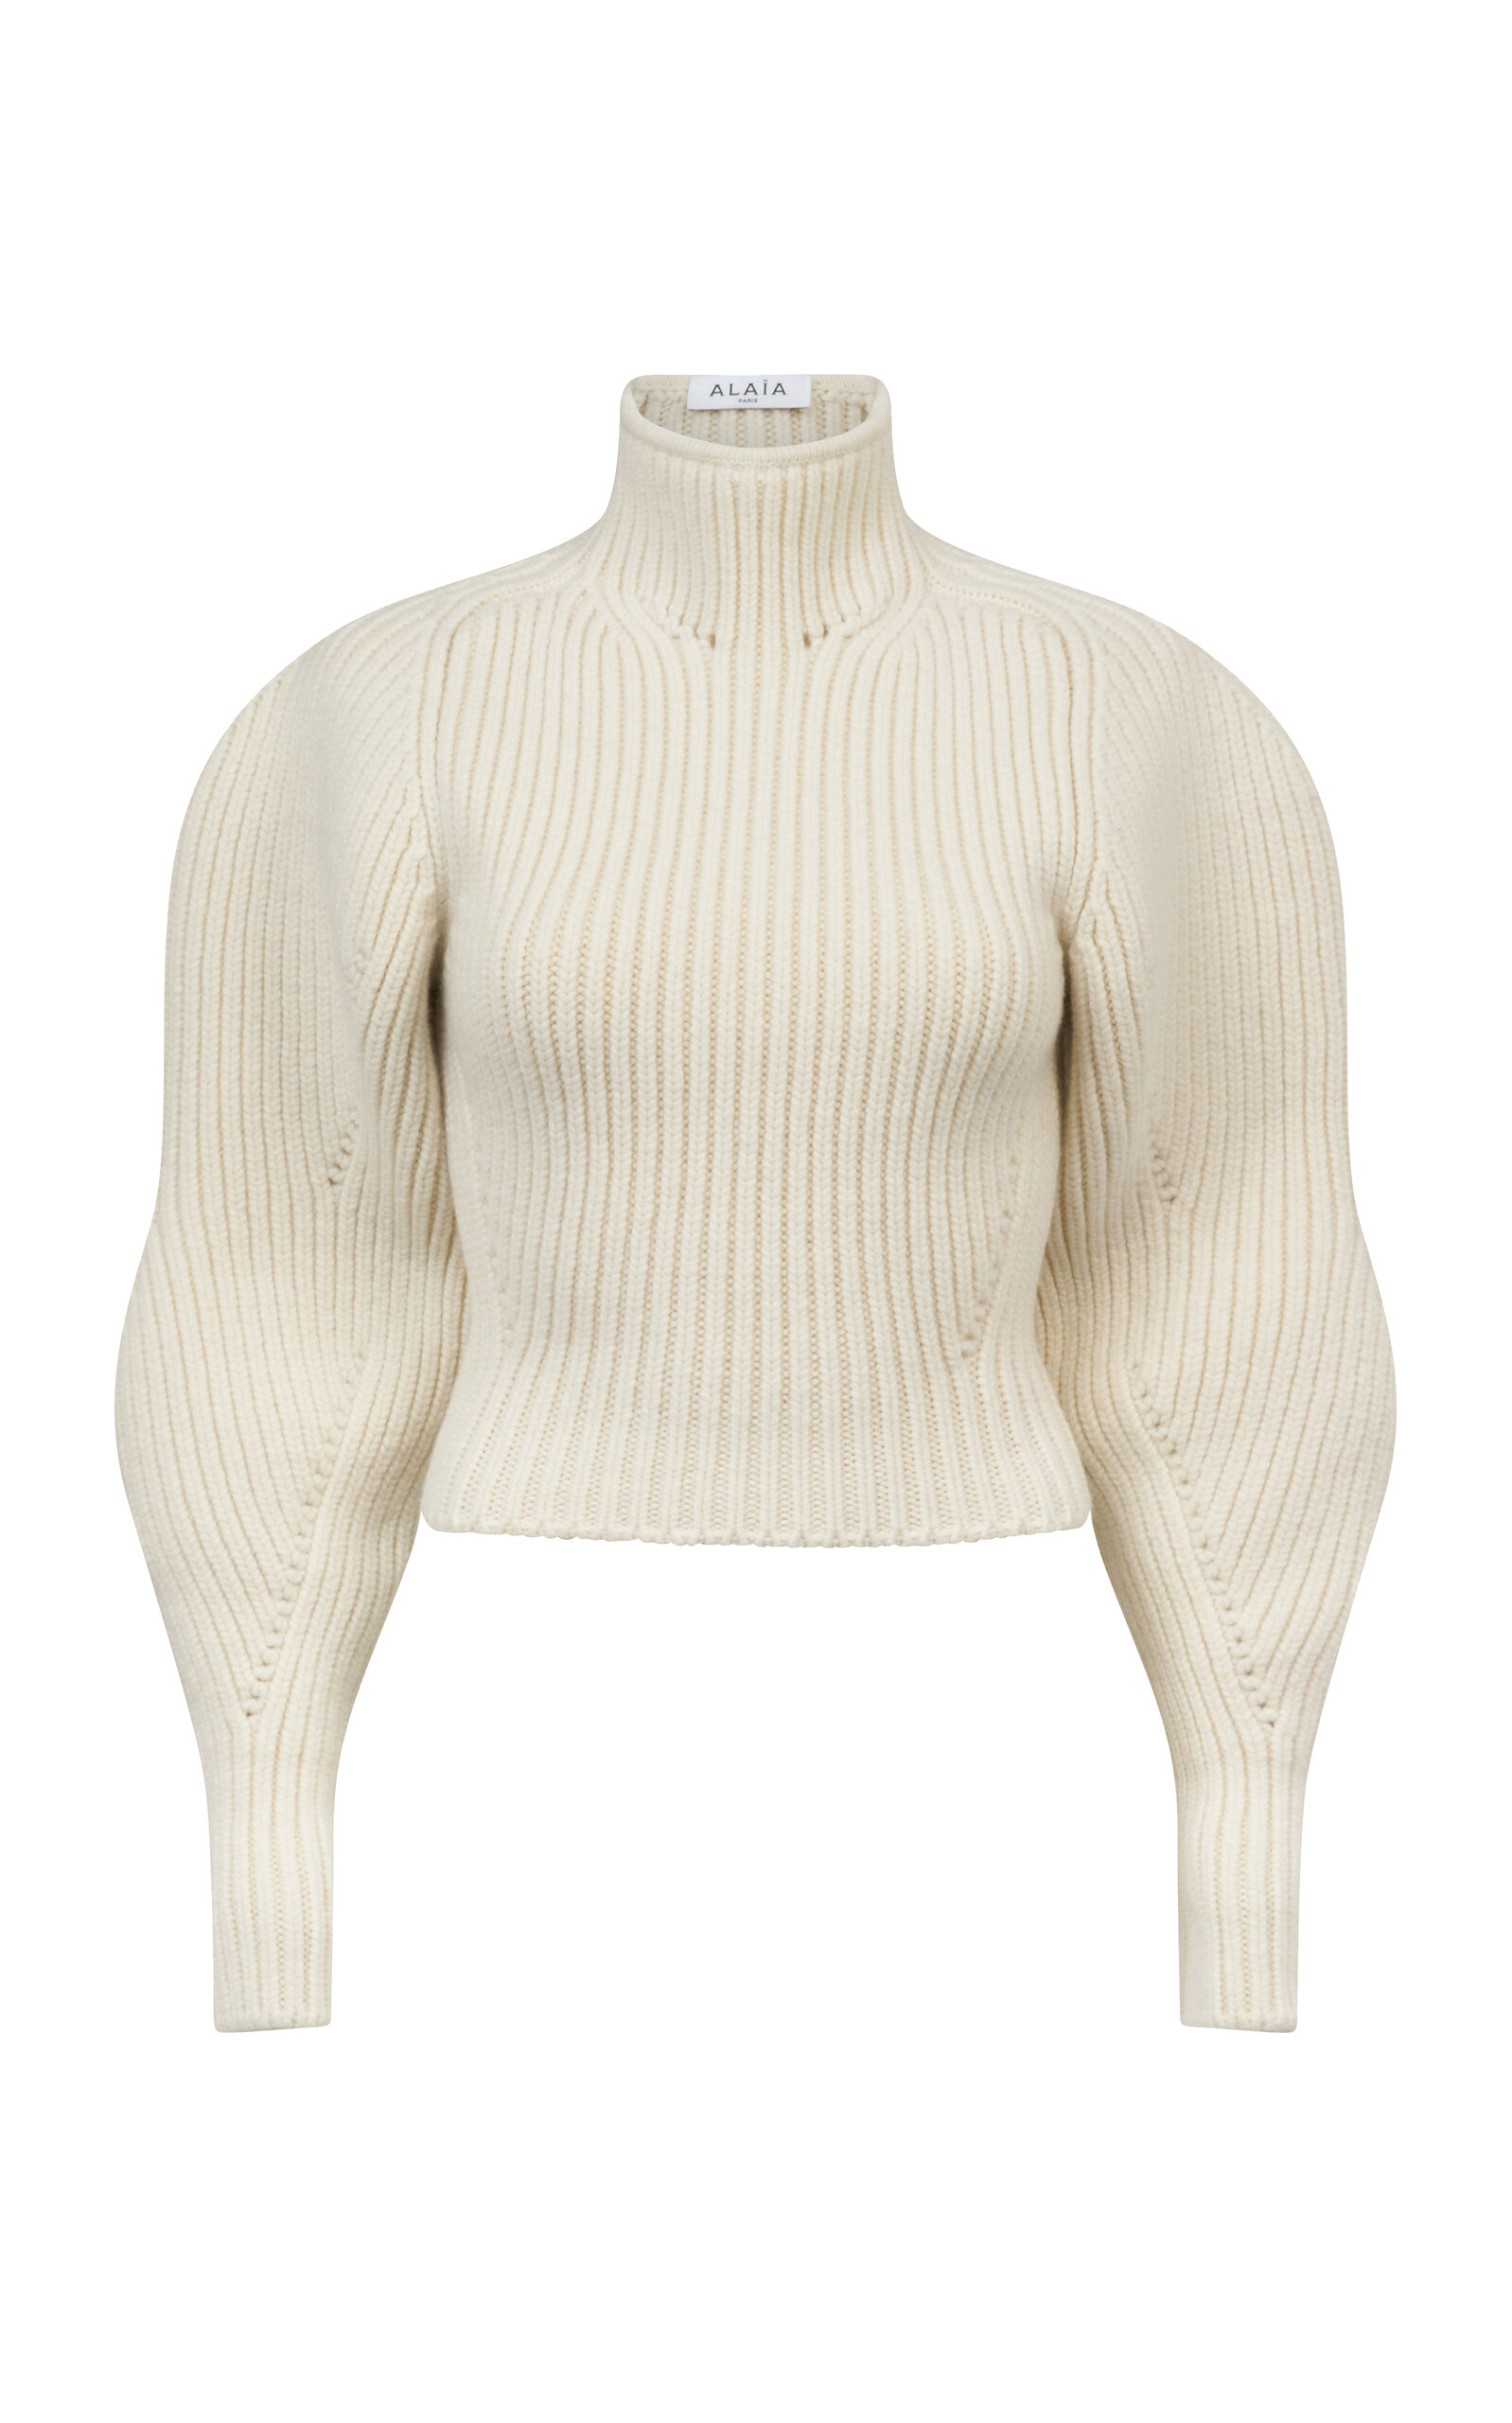 Alaïa Women's Ribbed Knit Top In Ivory